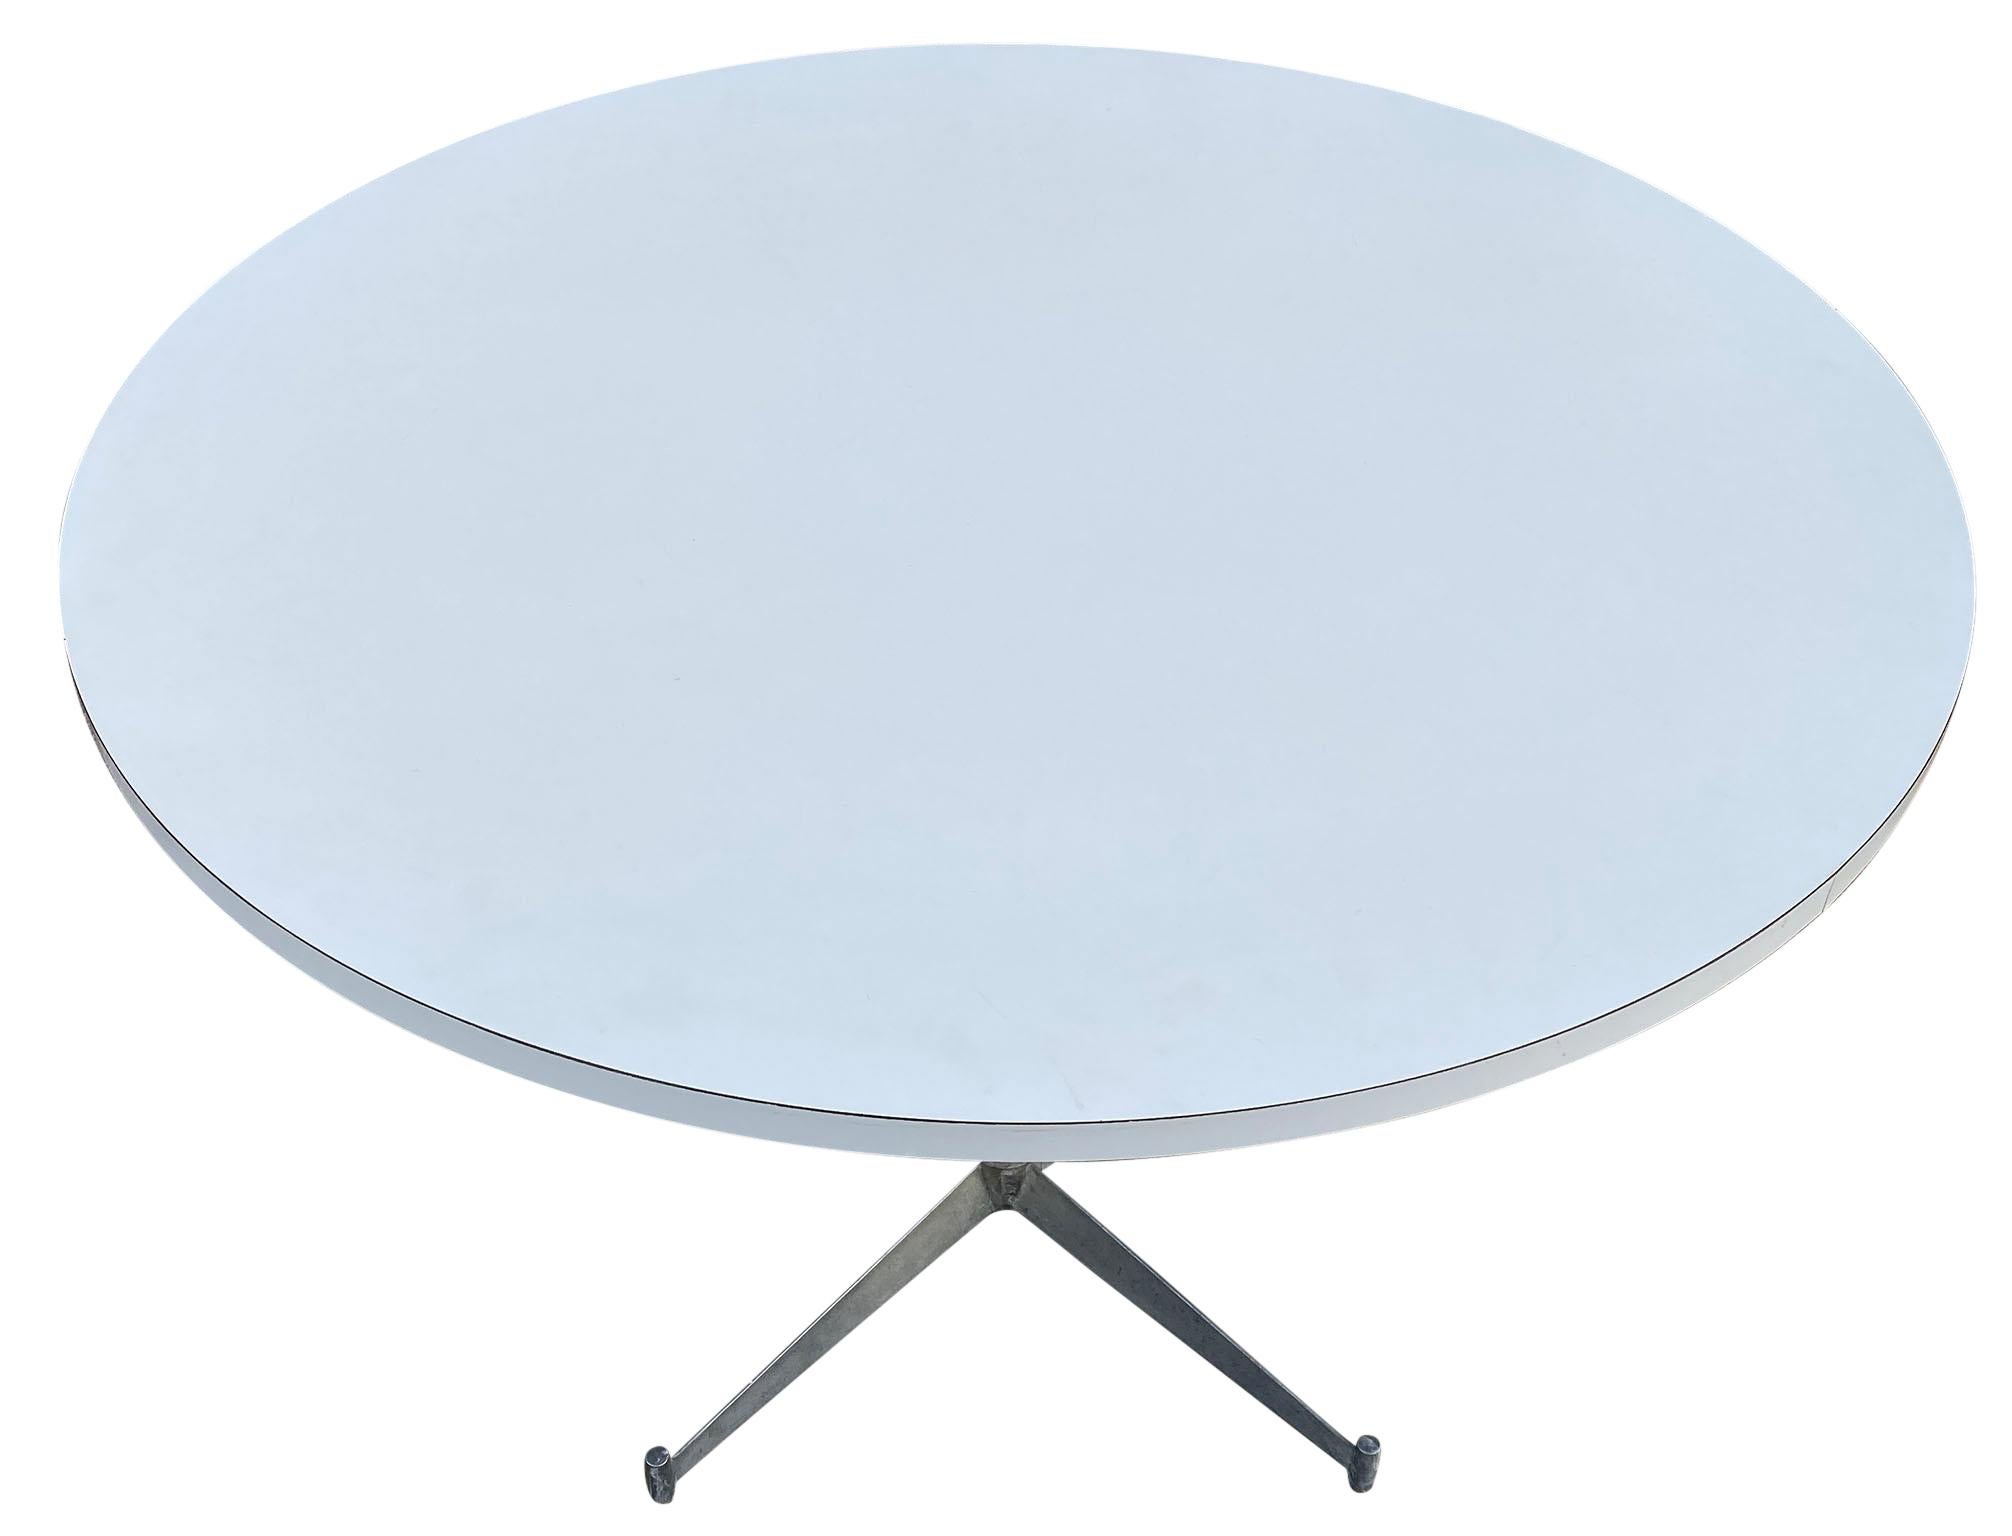 A Mid-Century Modern round white laminate dining table with aluminum base designed by Paul McCobb. The table is in great original vintage condition. Great design, rare table.

Measures: 42